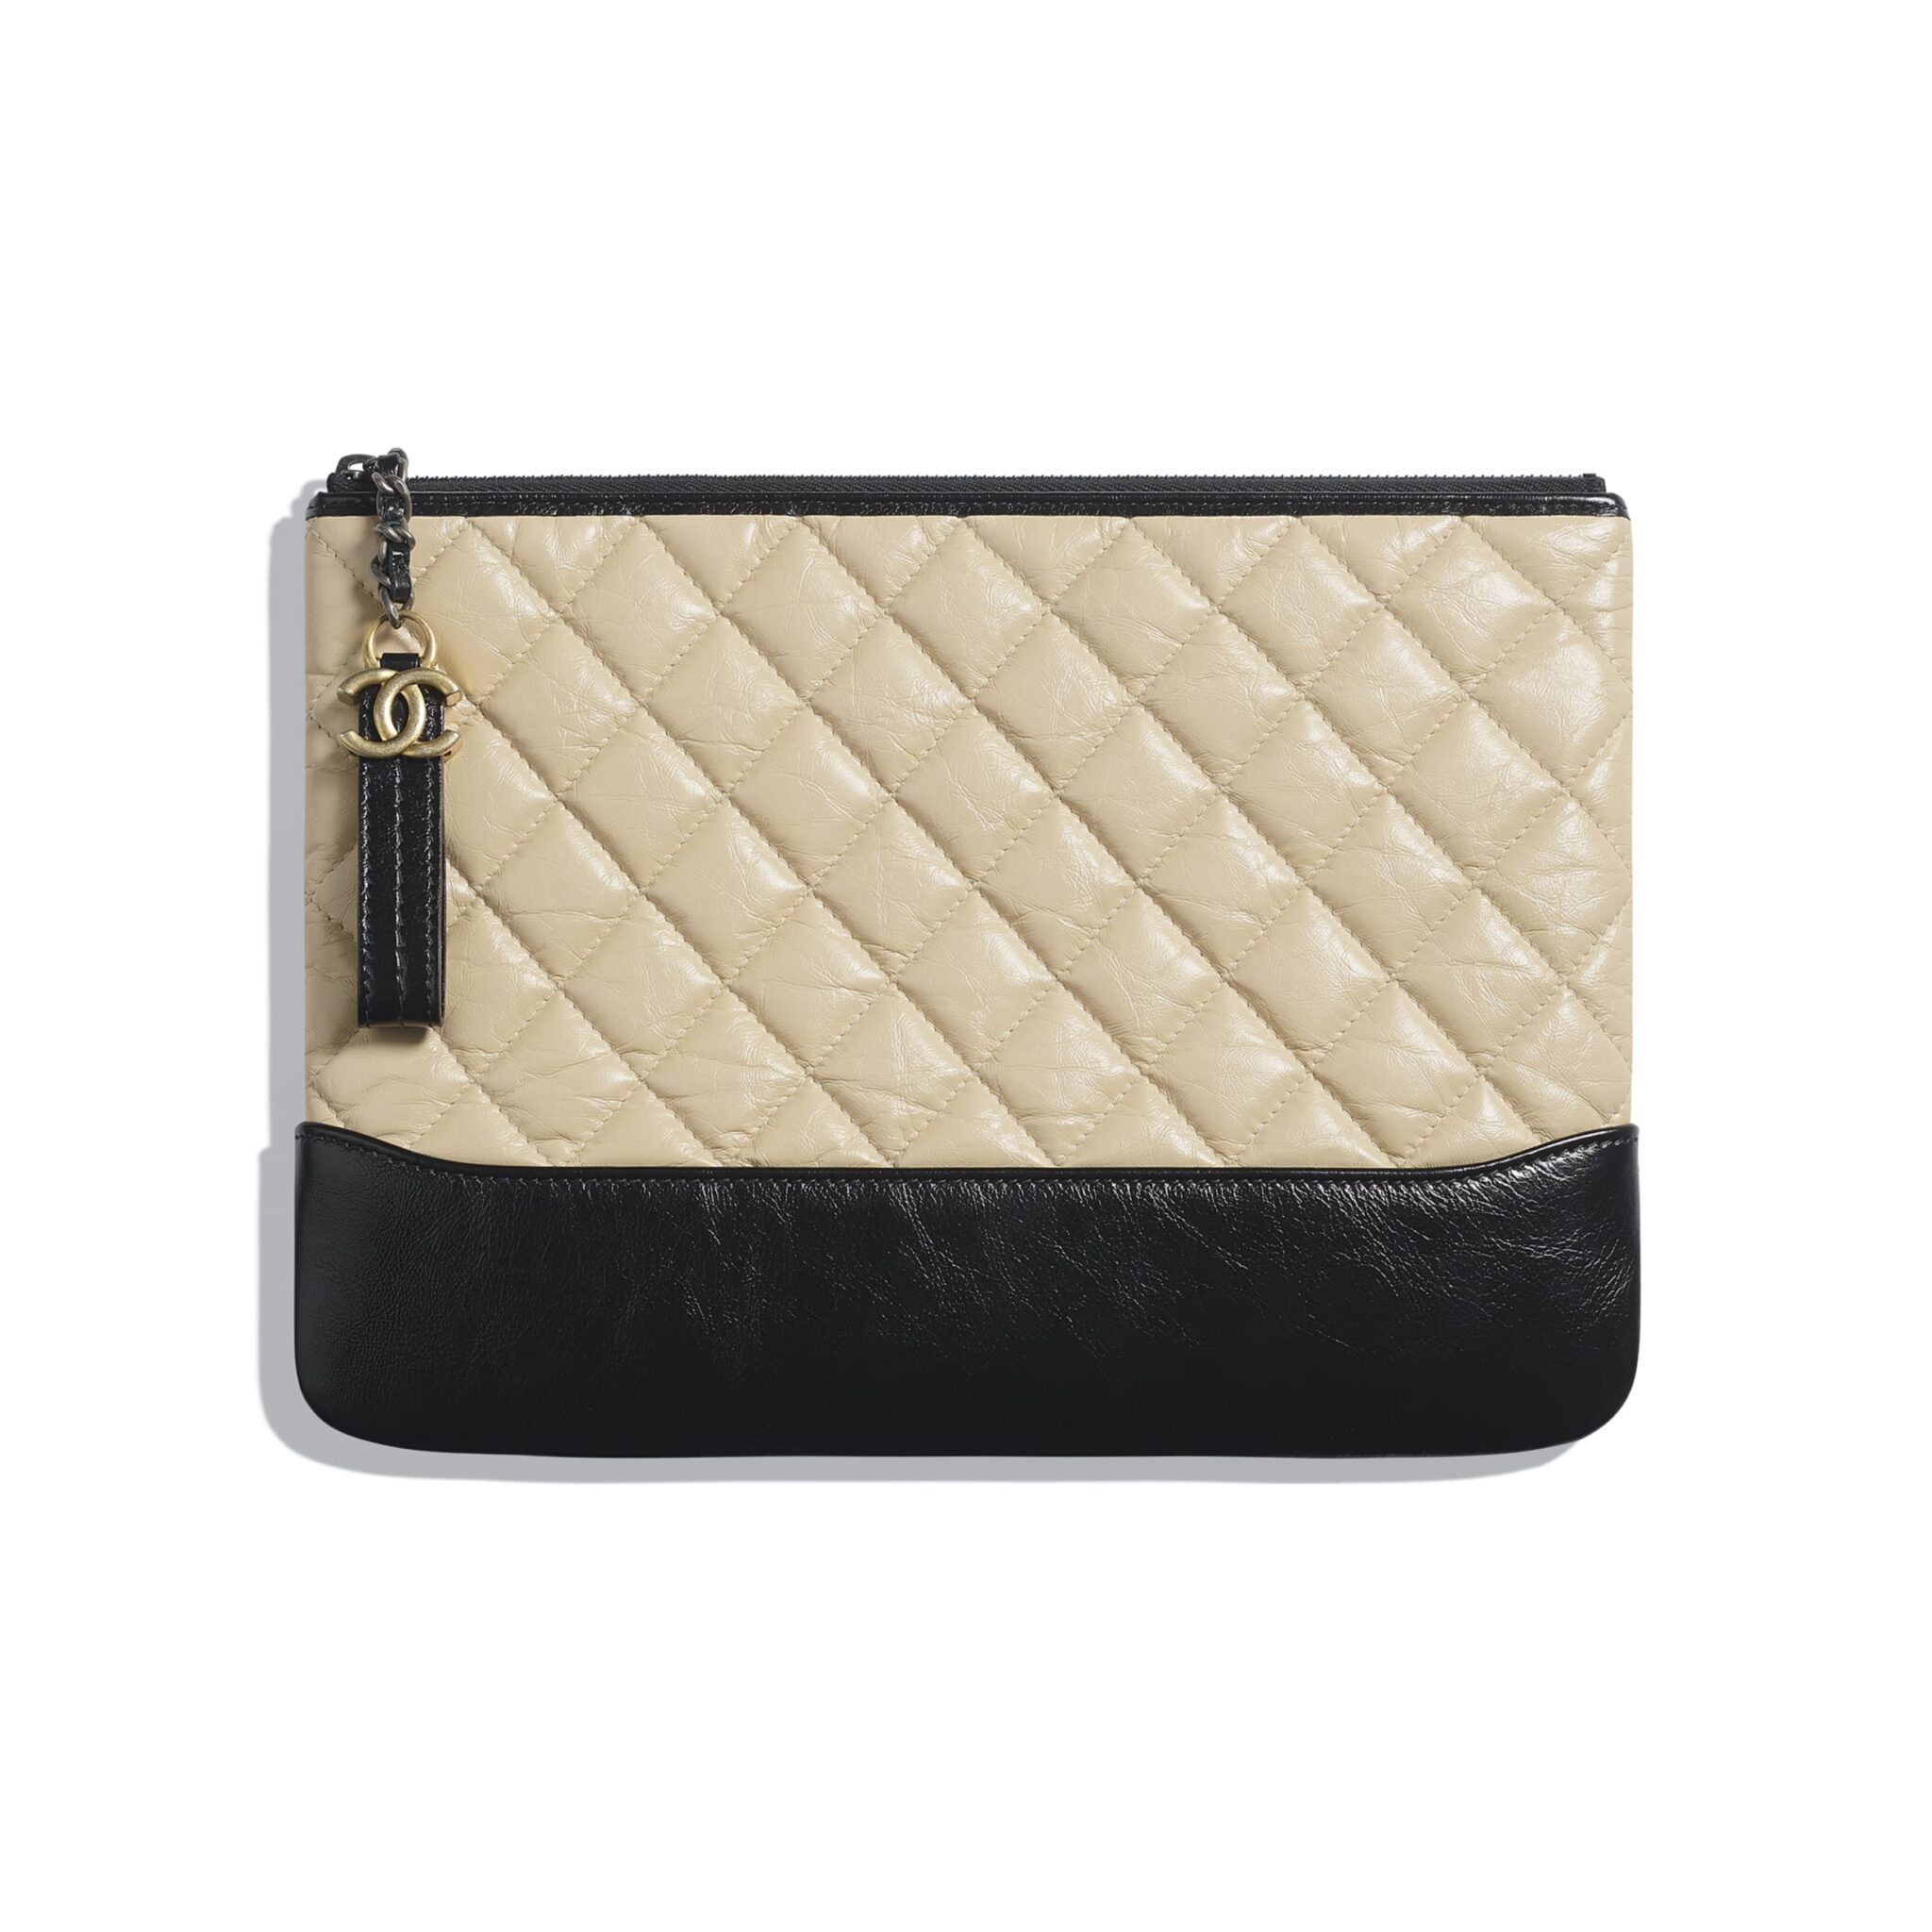 Chanel Palette Line – Small Leather Goods